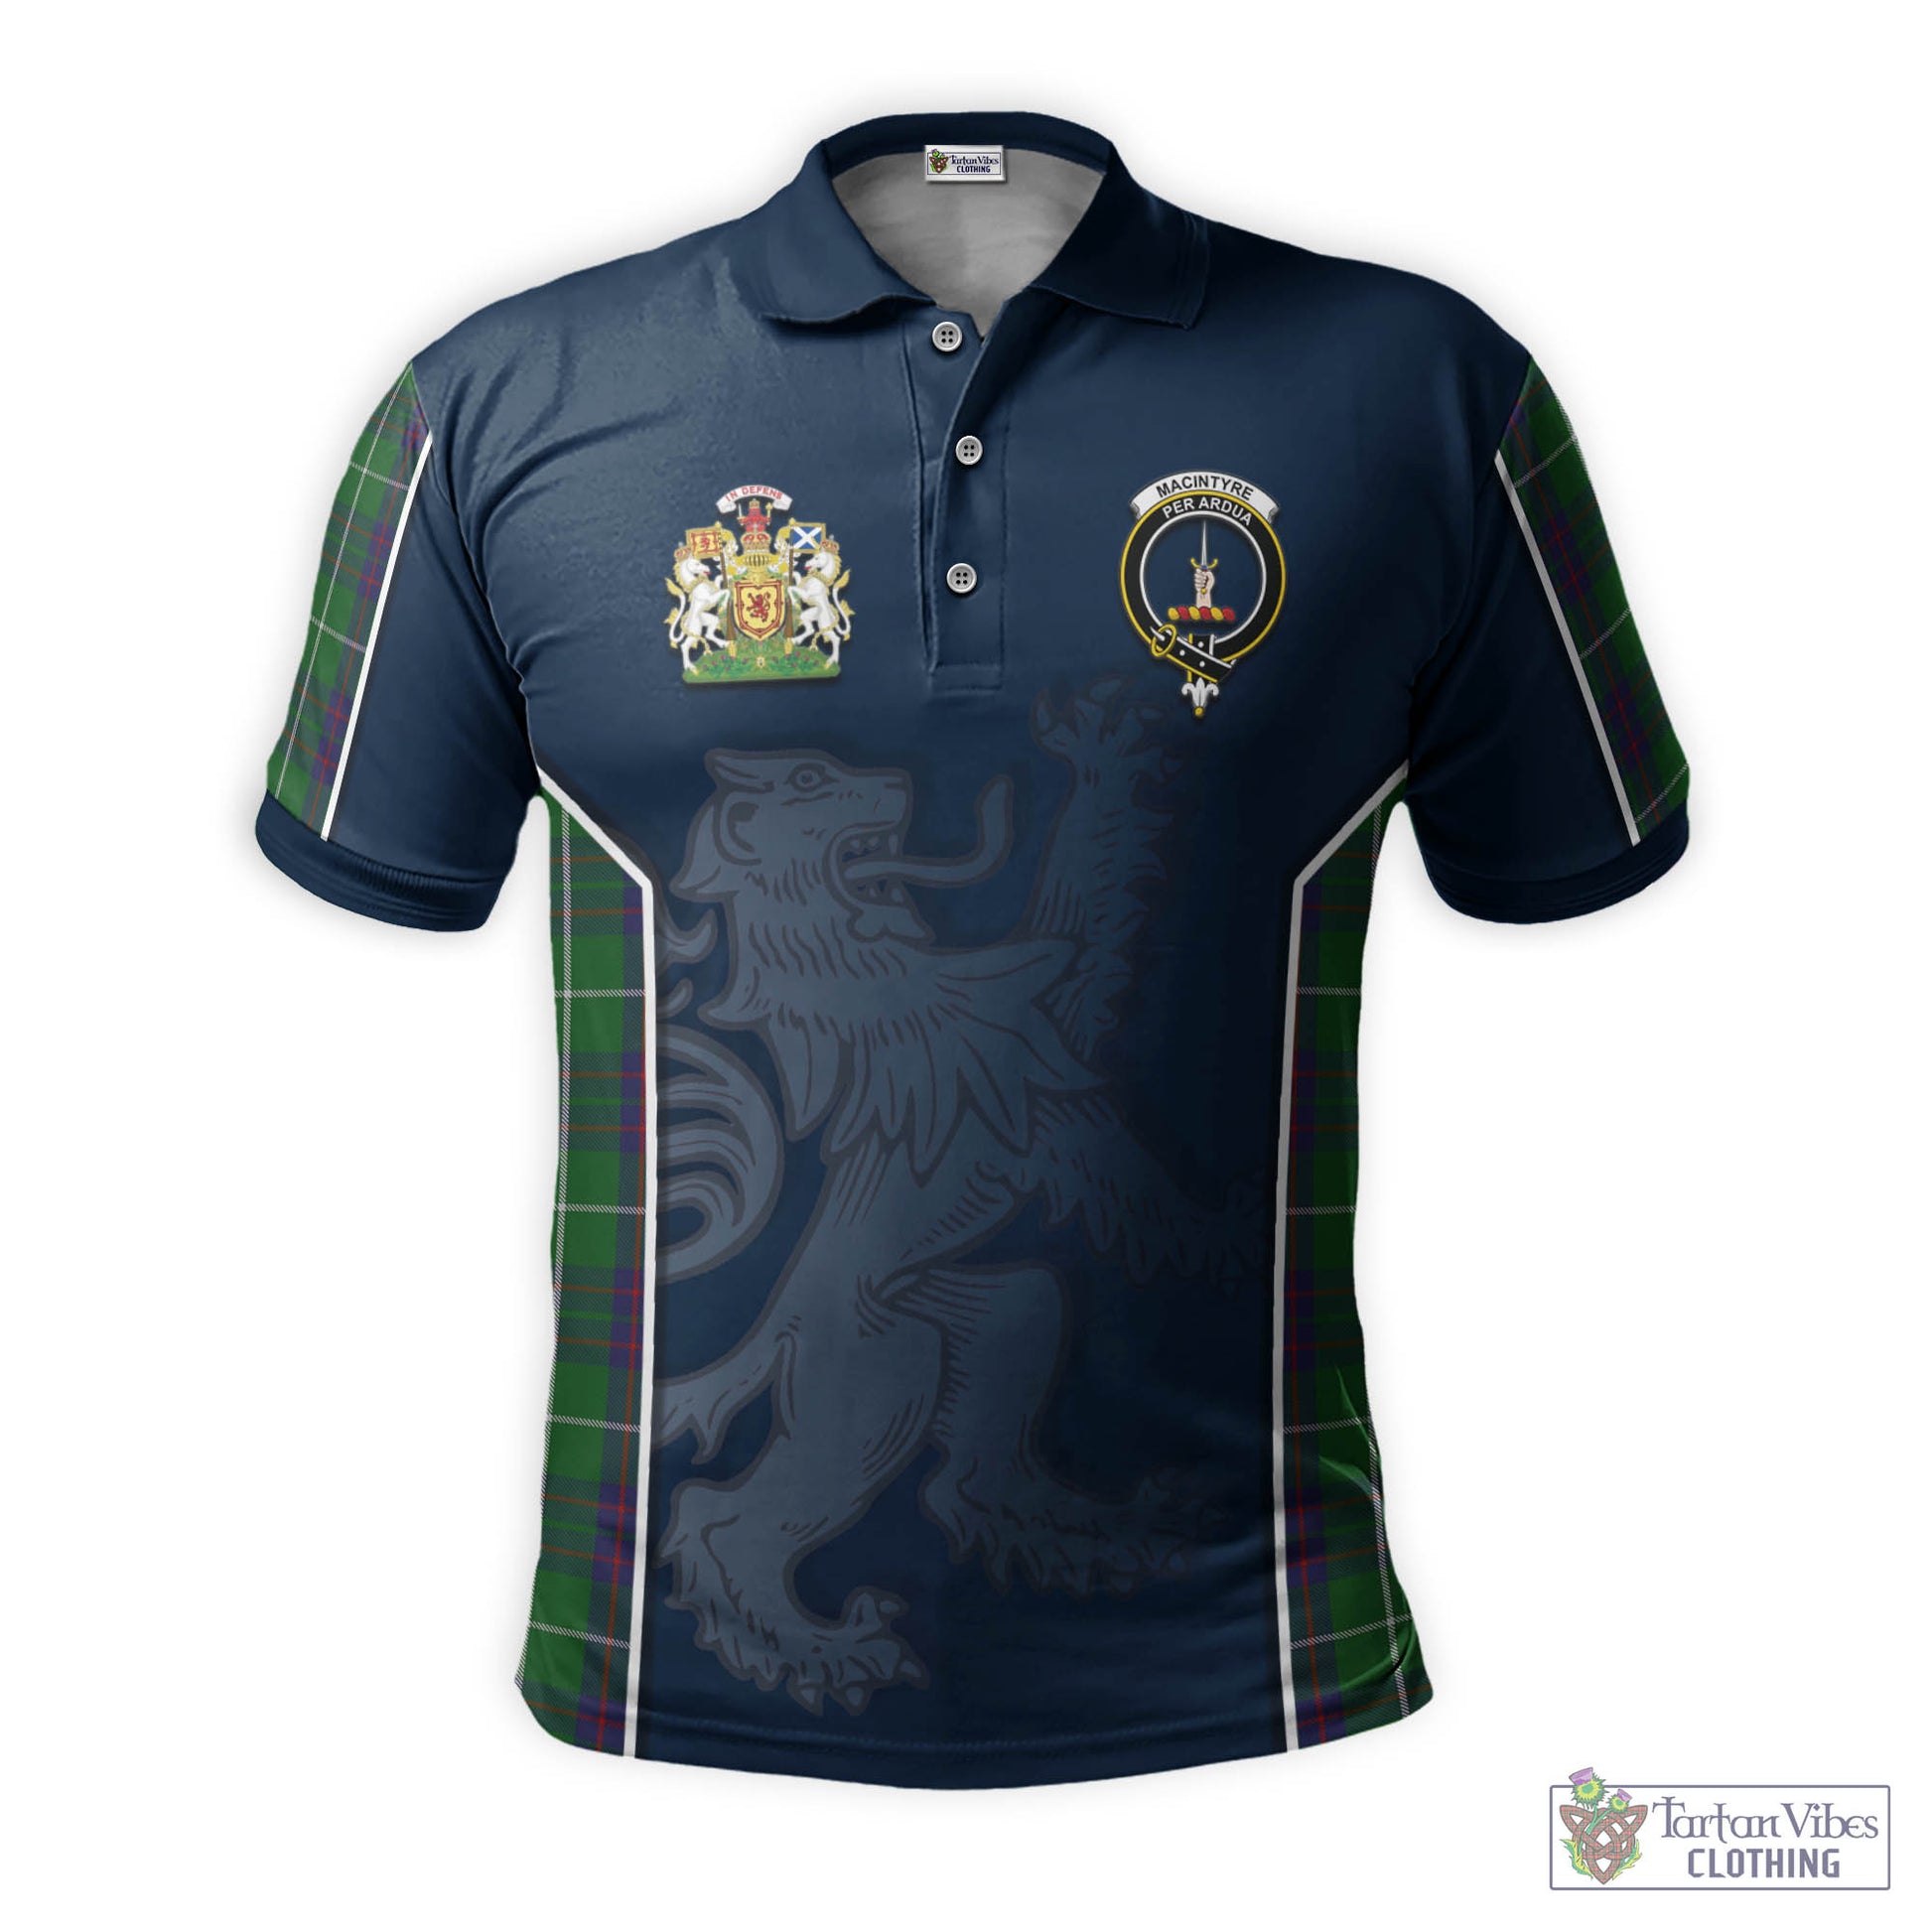 Tartan Vibes Clothing MacIntyre Hunting Tartan Men's Polo Shirt with Family Crest and Lion Rampant Vibes Sport Style